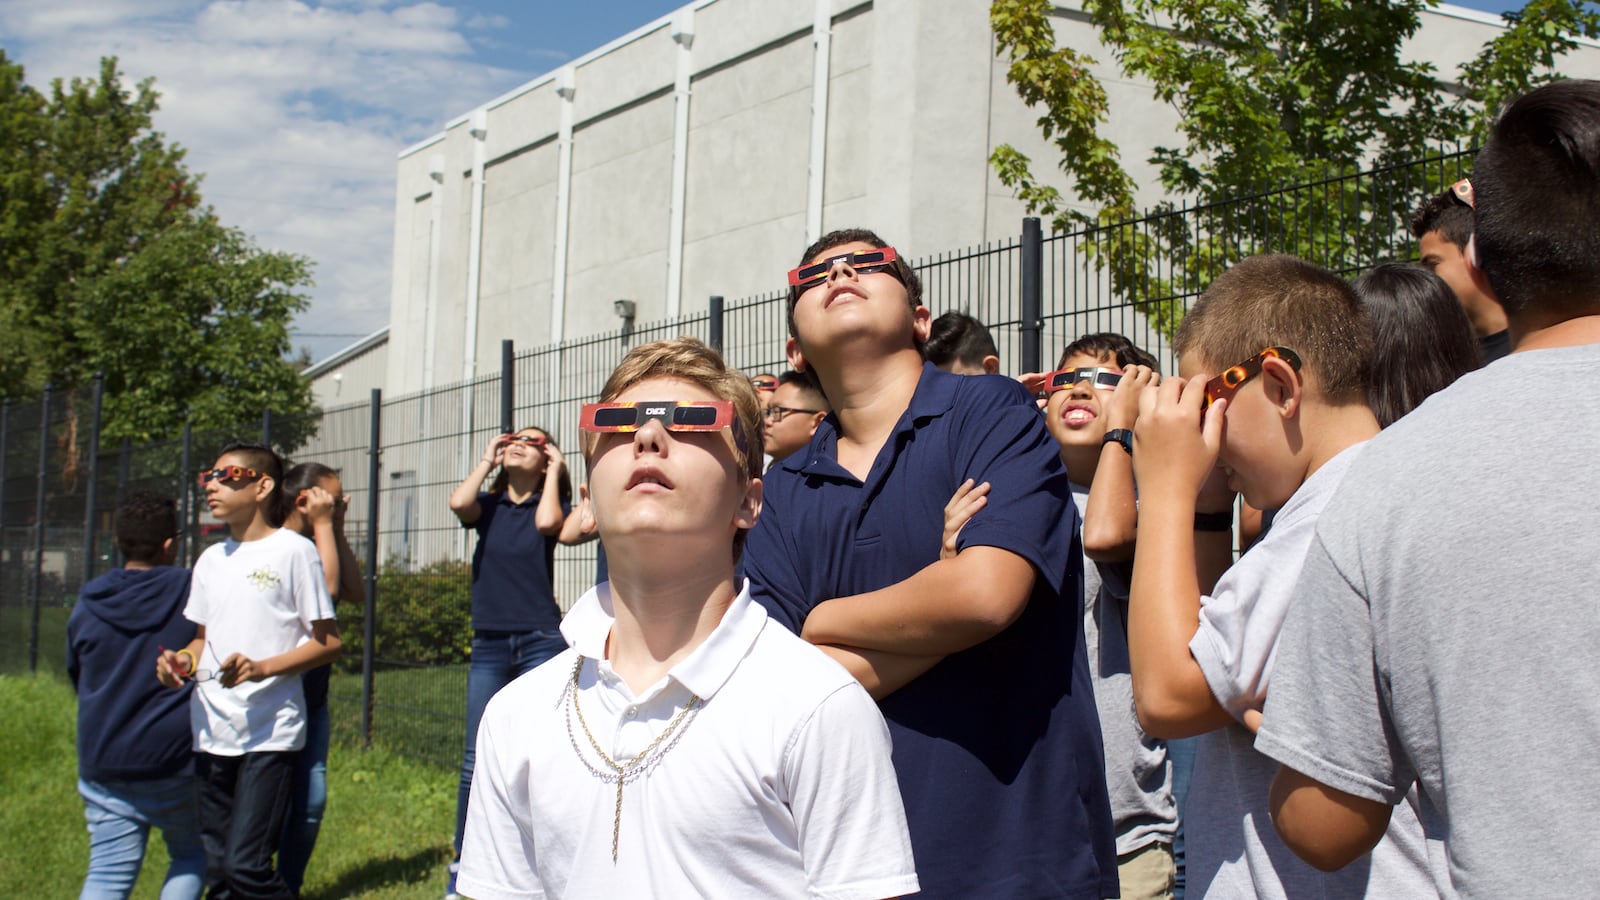 Students at Scott Carpenter Middle School take in the total solar eclipse. (Photo by Marissa Page/Chalkbeat)